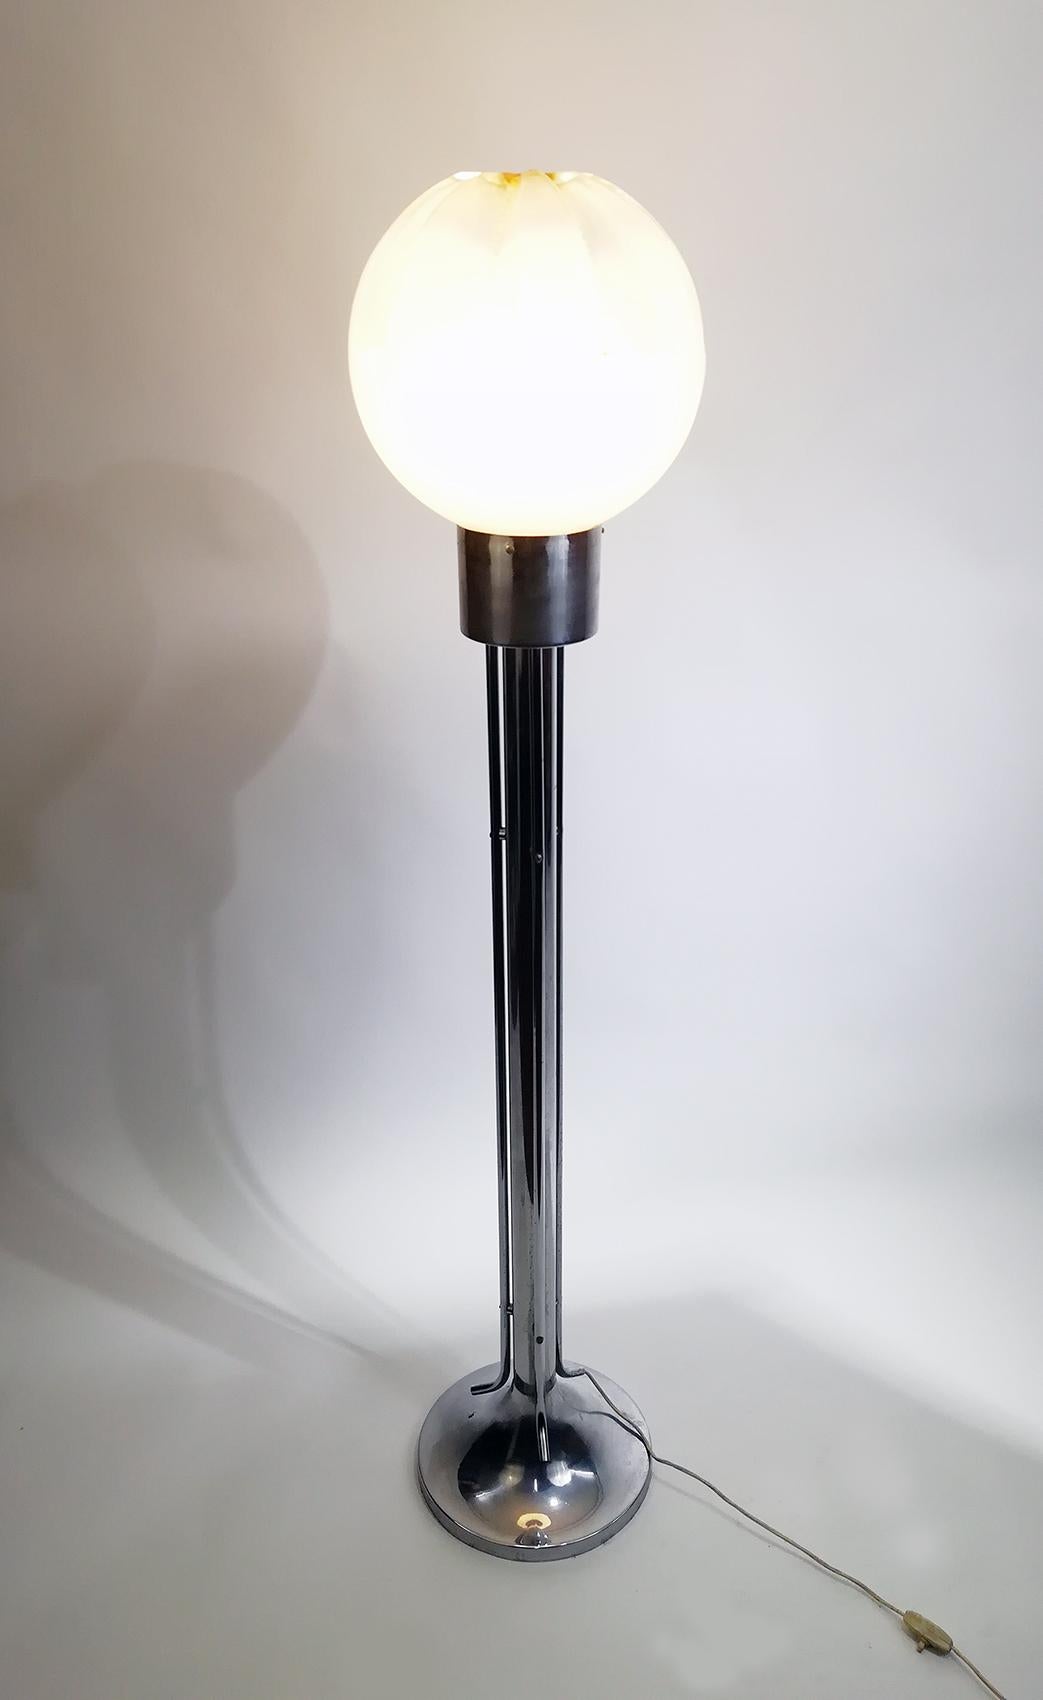 Sublime floor lamp made by A.V. Mazzega with very impressive colored large blown glass bowl and a chromed steel base.
This floor lamp has beautiful light effect when lit.
Manufactured in the early 1970s.
Dimensions: H=144 cm Ø base = 30 cm
It